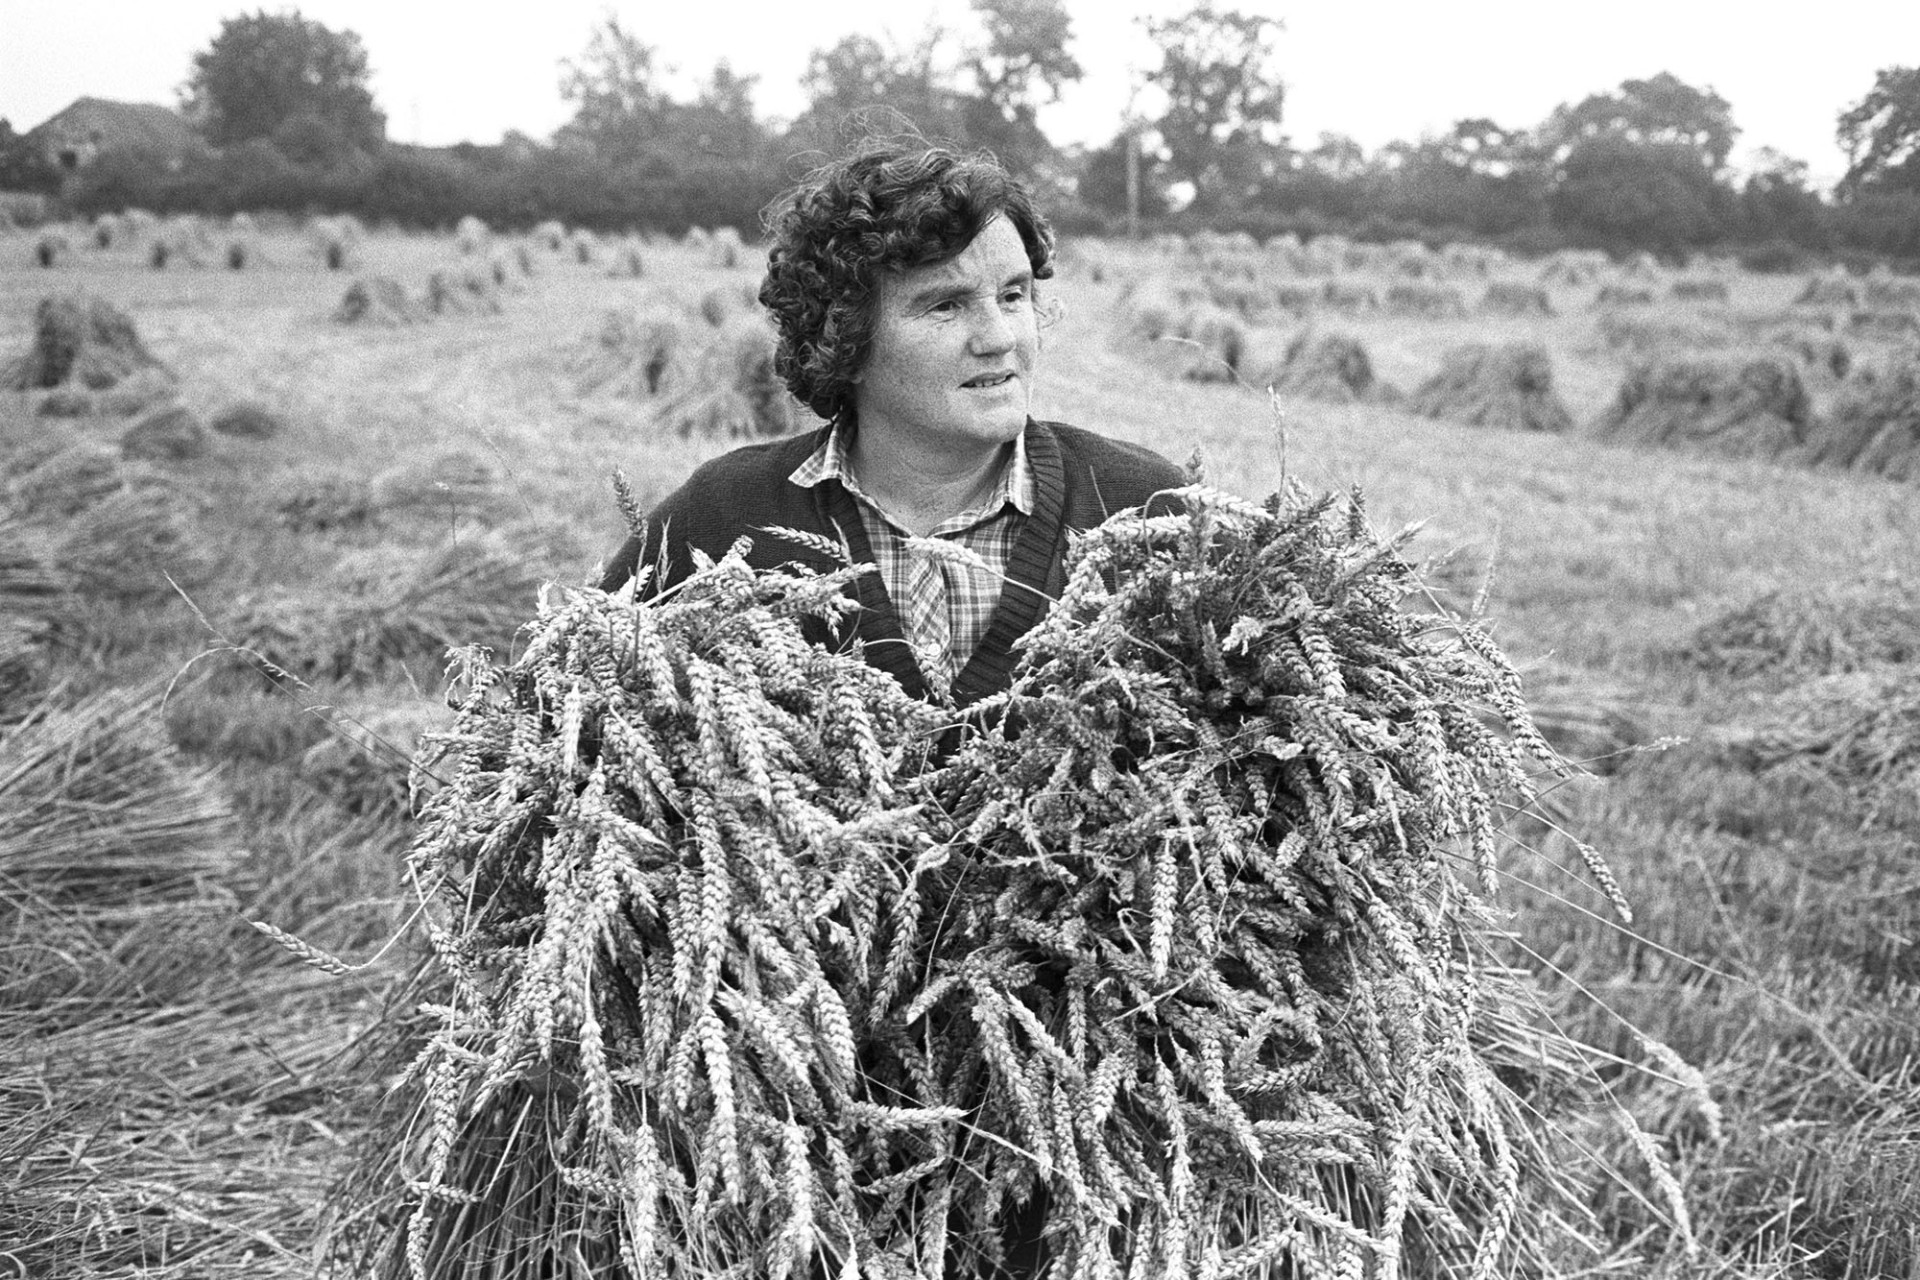 Farmers, woman holding sheaf of corn, setting up stooks. 
[Eileen Squire holding sheaves of corn to set up as stooks in a field at Chapple, Dolton. Other stooks are visible in the background.]